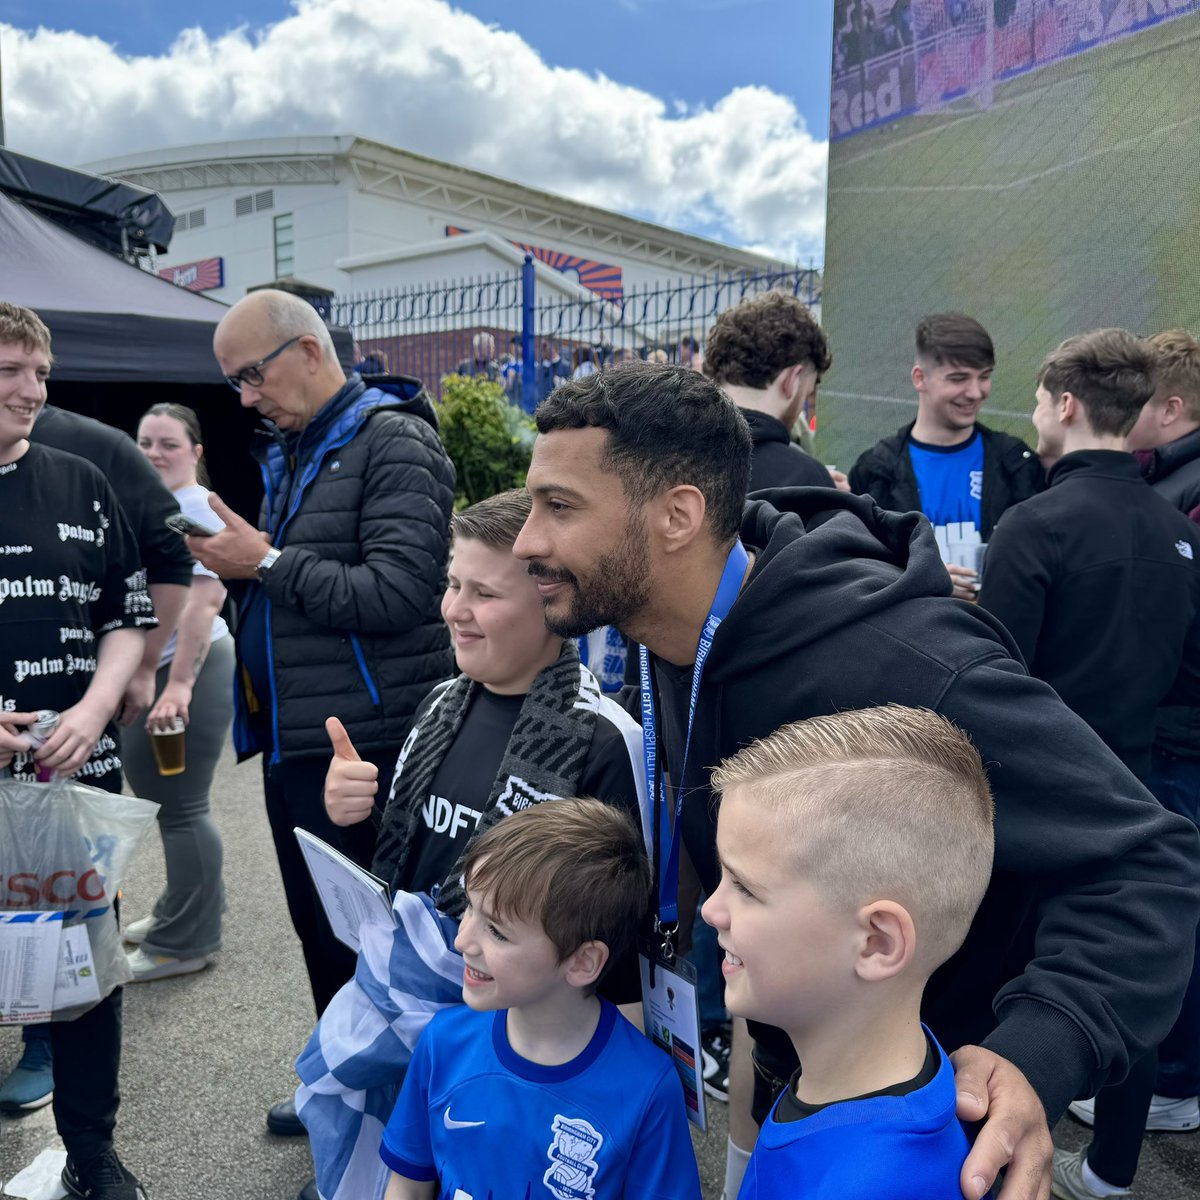 Blues hero David Davis meets fans in the lead-up to kick-off. 📸